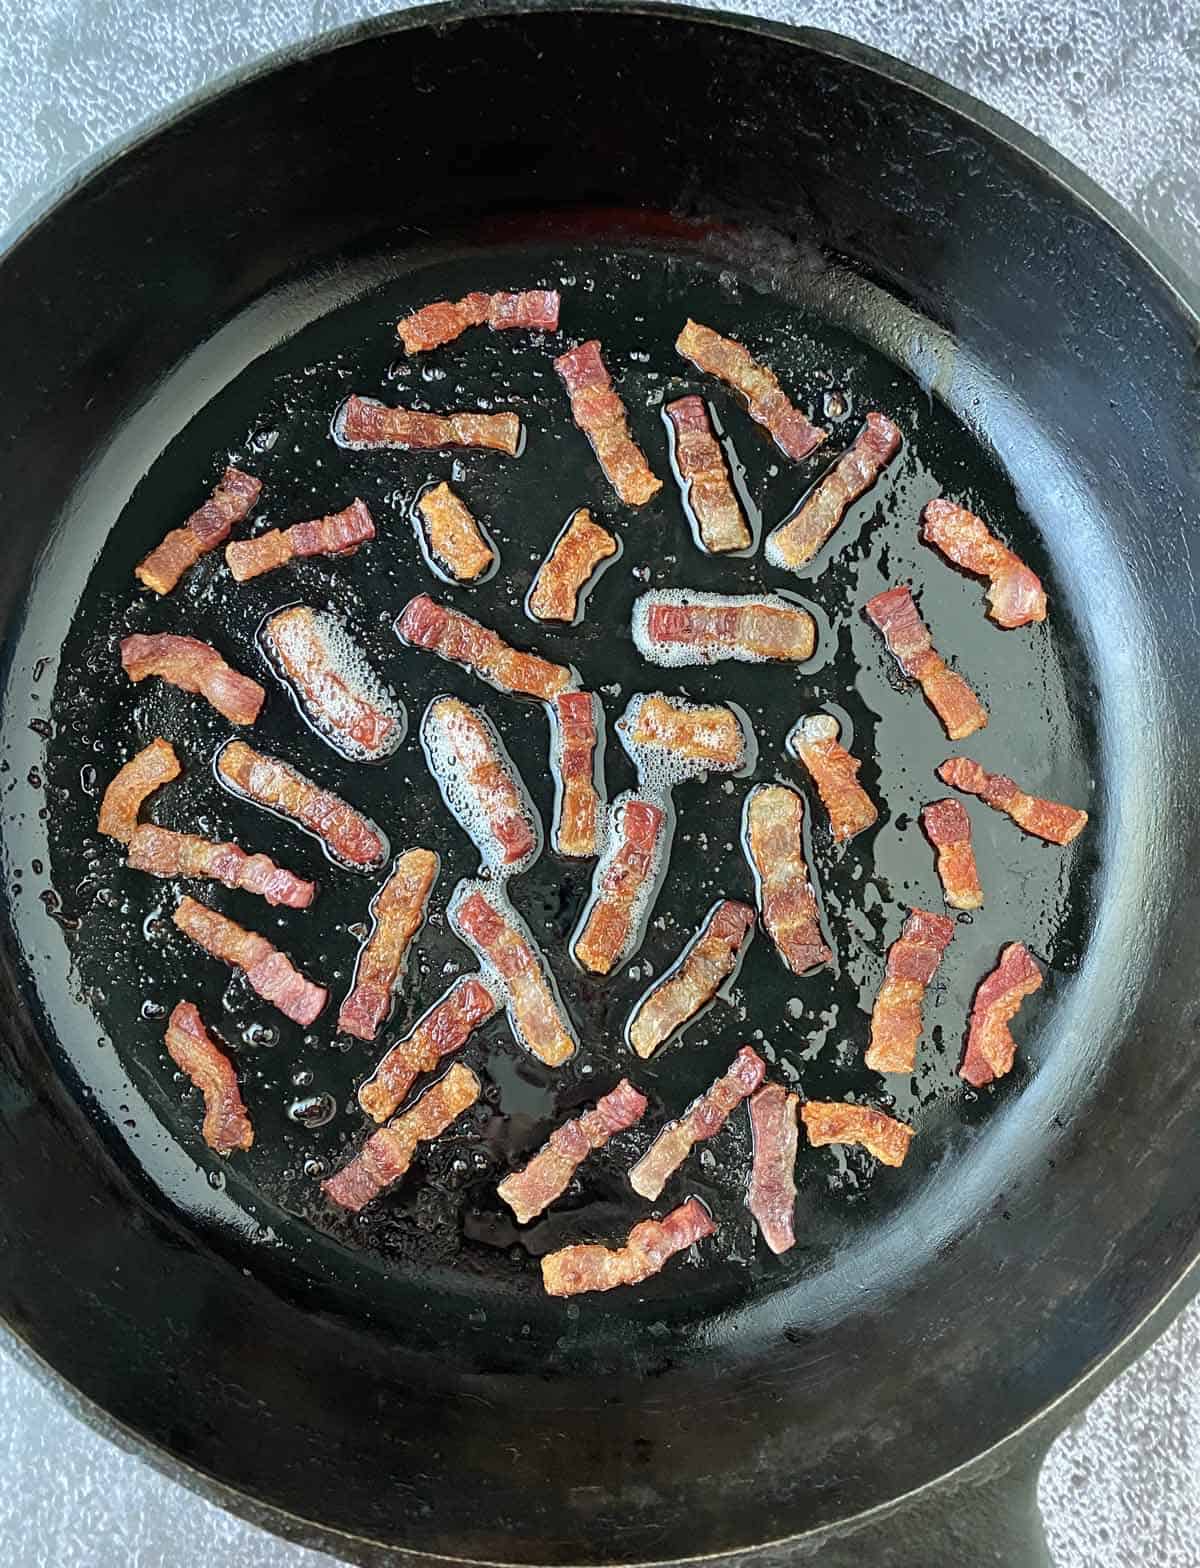 Bacon lardons cooking in a black cast iron skillet with rendered bacon fat.